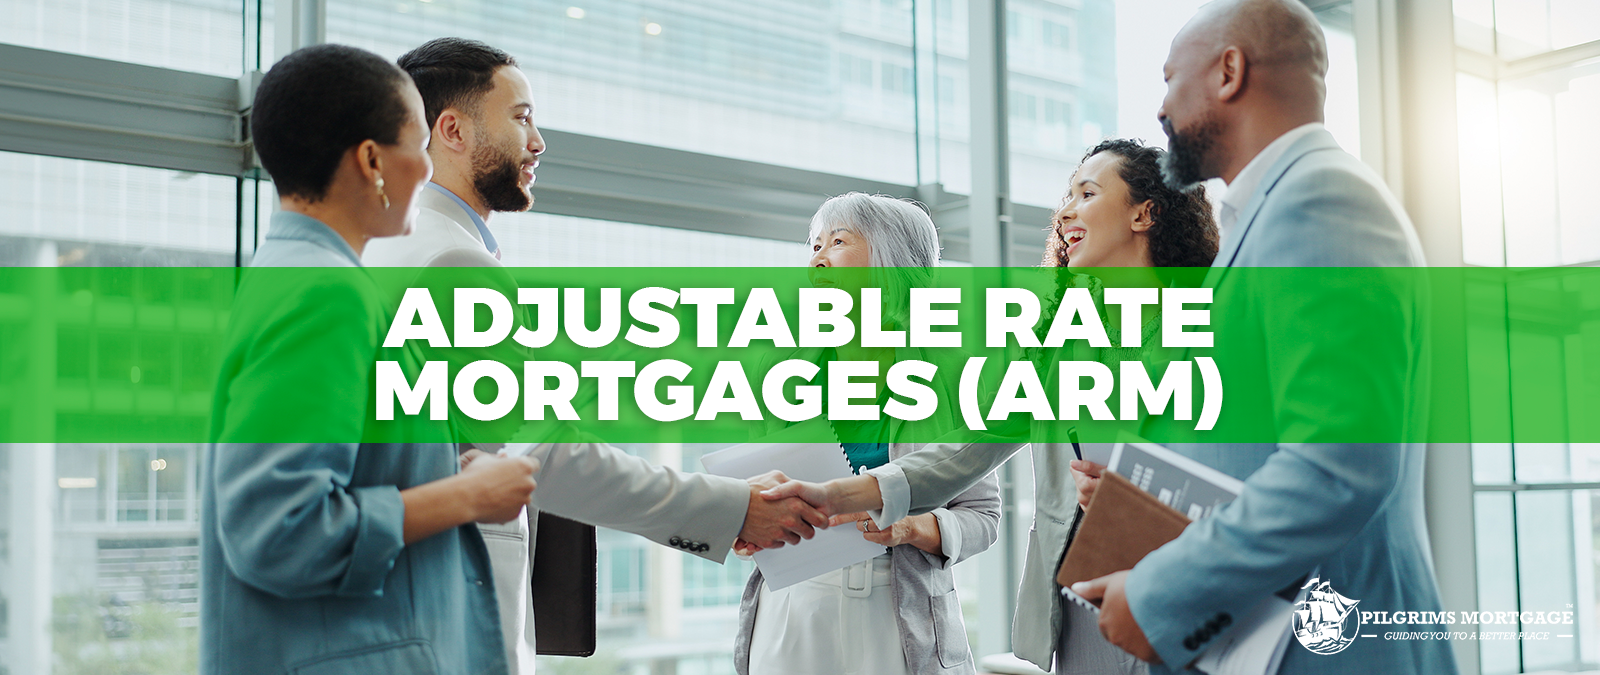 ADJUSTABLE RATE MORTGAGES (ARM)